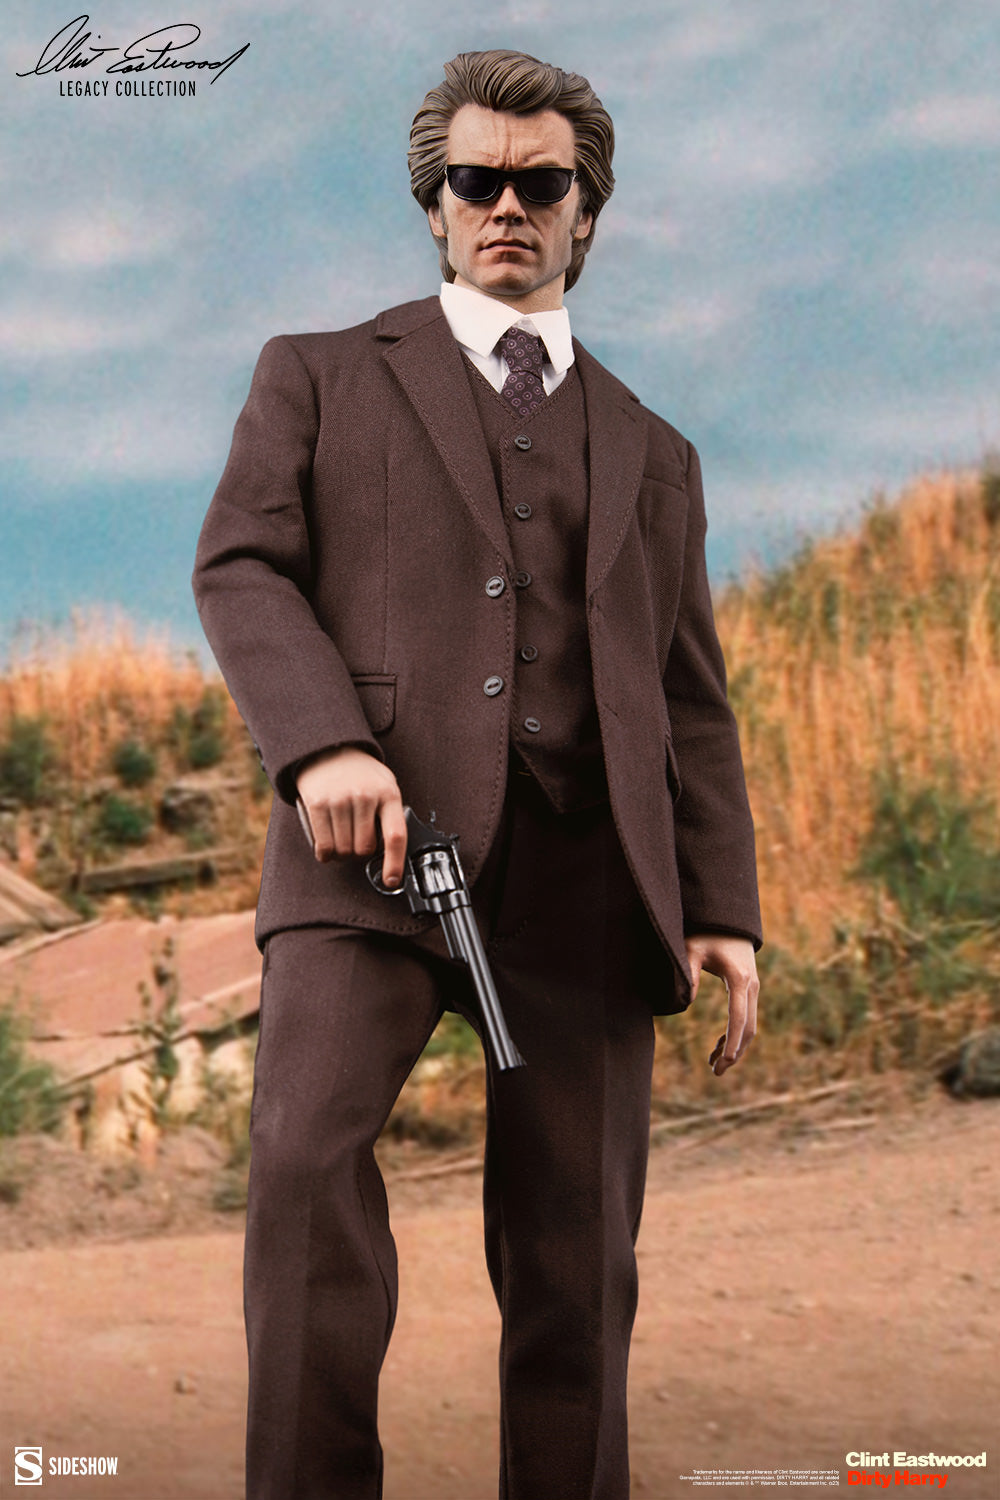 Harry Callahan (Final Act Version) 1/6 Scale Figure by Sideshow Collectibles